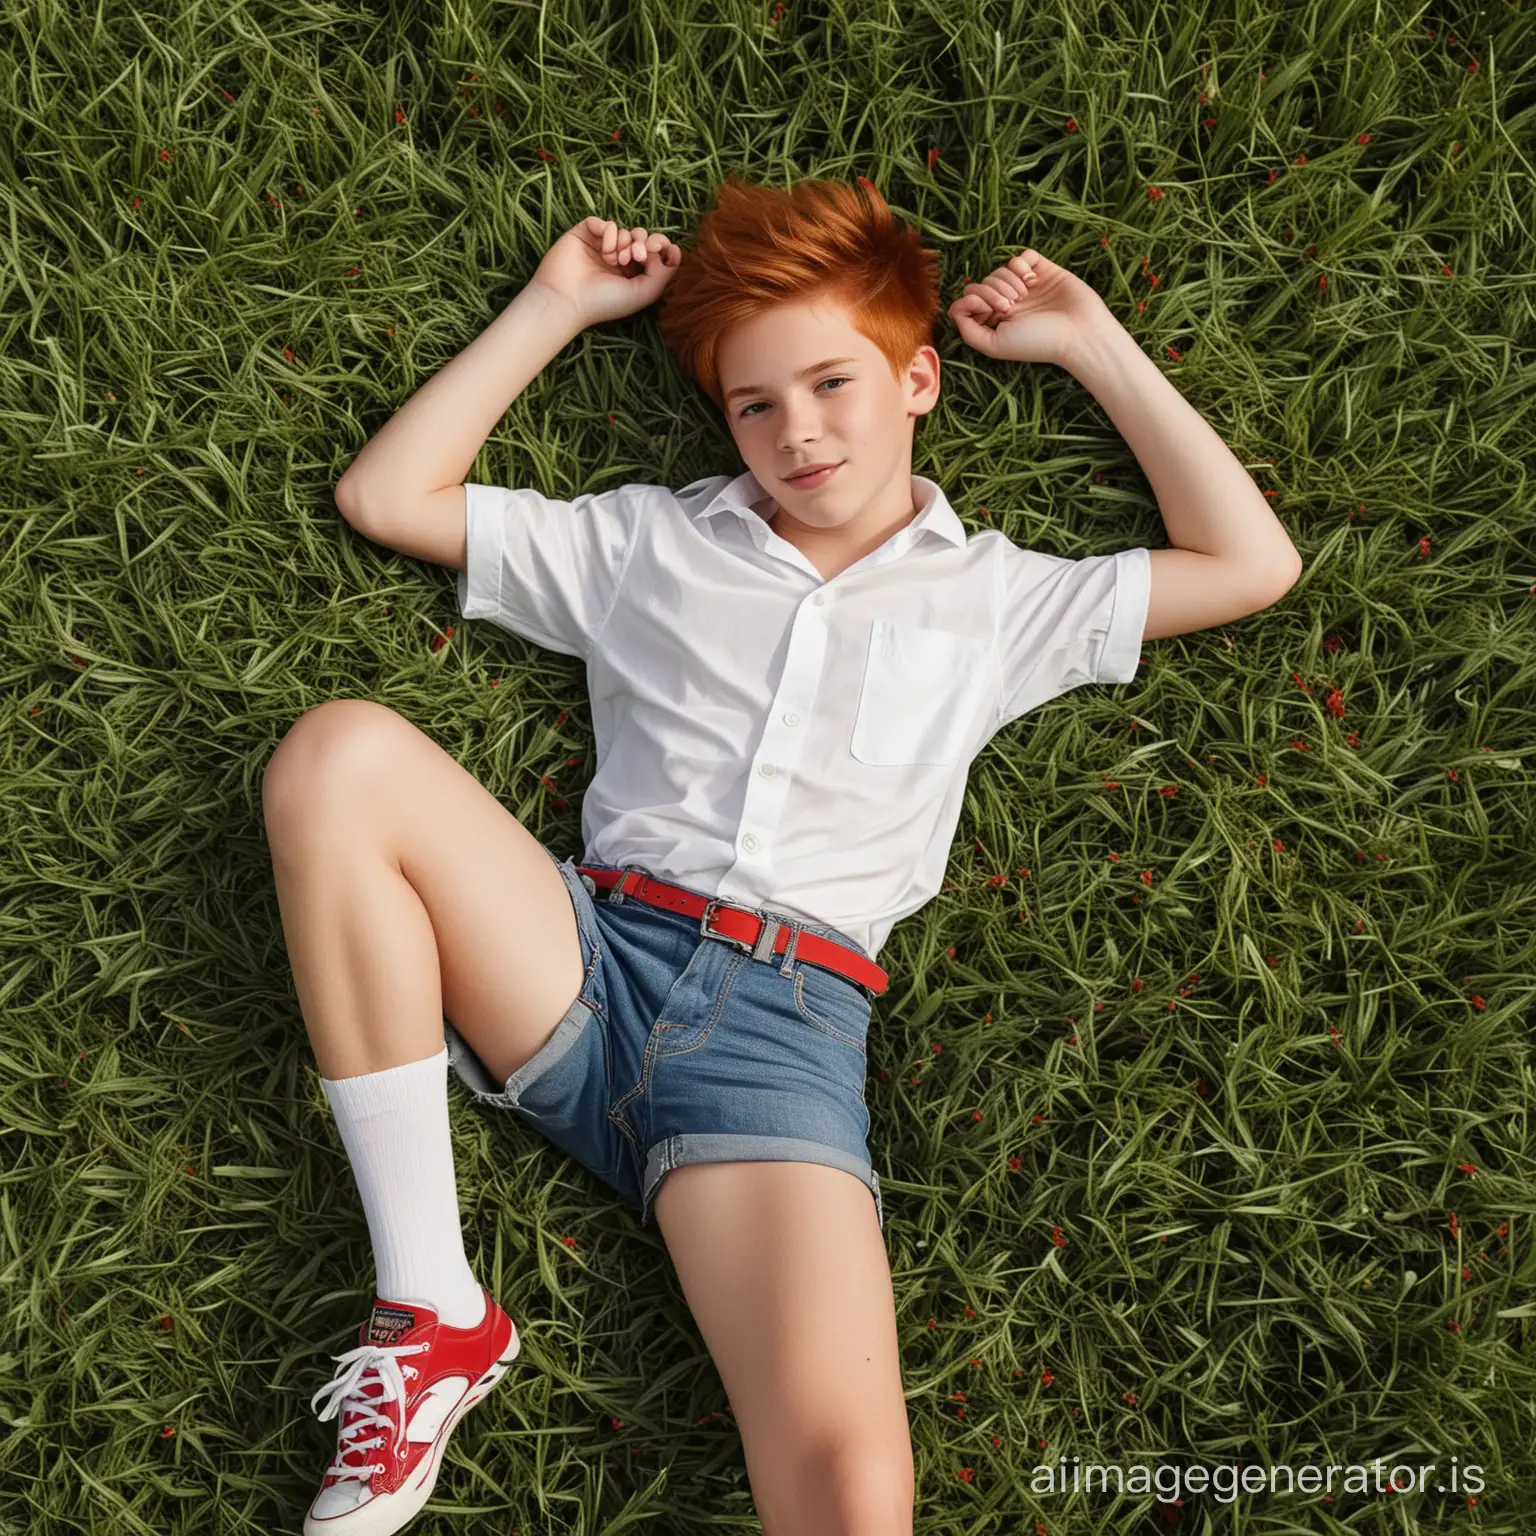 A charming photo showing a red-haired handsome boy of 14 years old, dressed in a white short-sleeved shirt with a red pattern, very short denim shorts with a red belt, long white knee-length socks, red sneakers. He is lying on his back in a field with lush green grass, with a relaxed and thoughtful expression on his face. The photo shows the boy in full.